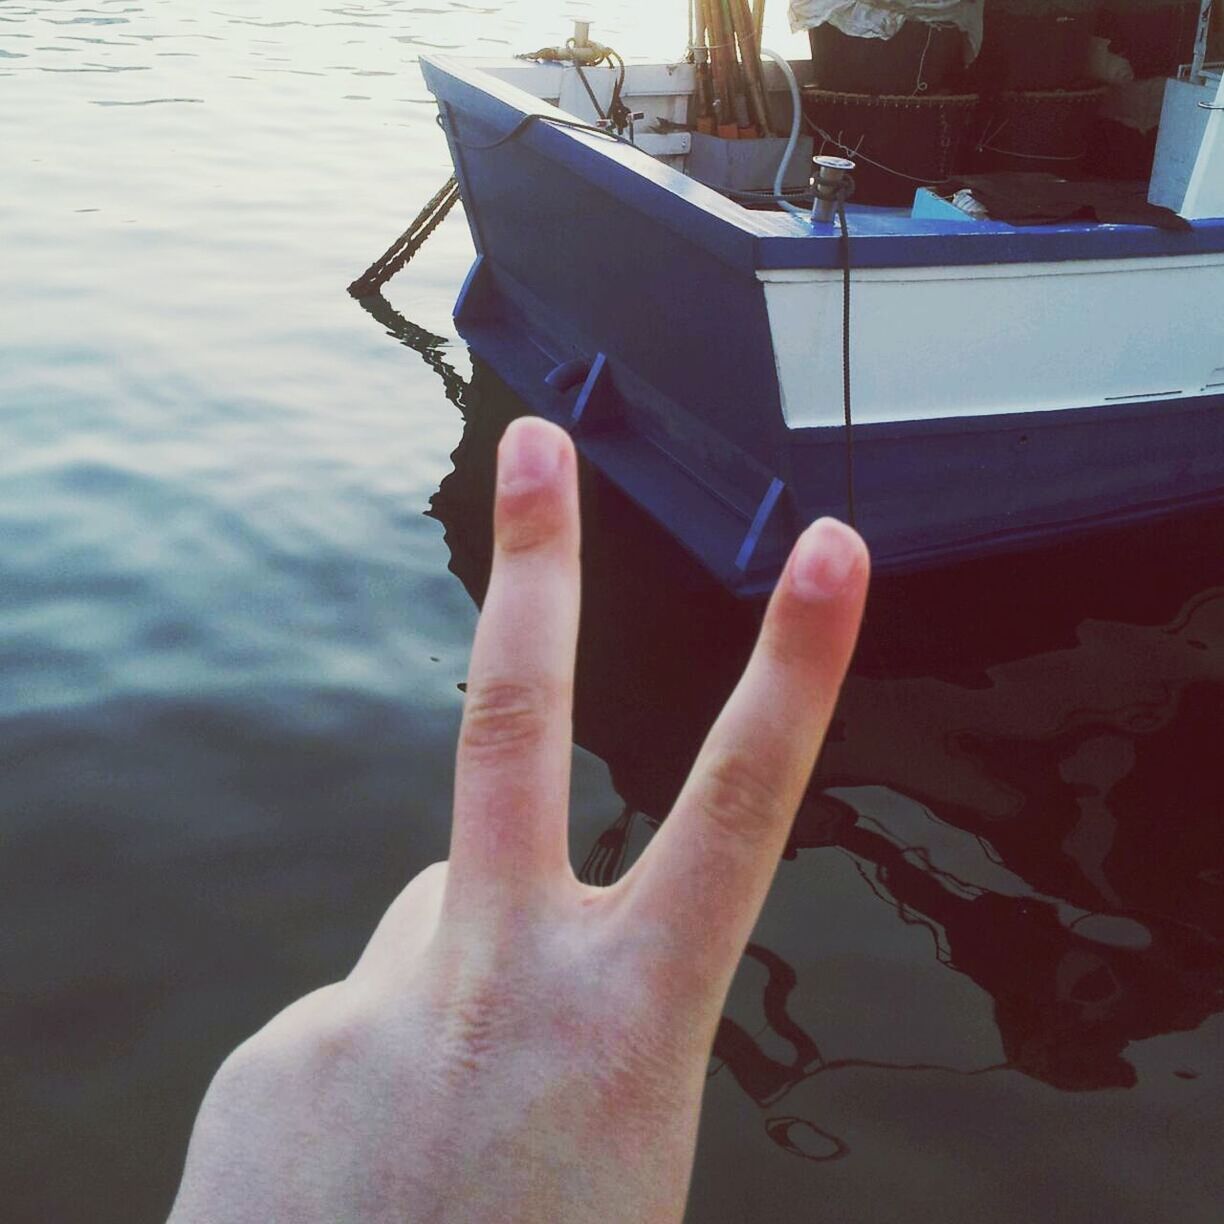 person, part of, cropped, water, personal perspective, human finger, holding, unrecognizable person, lake, lifestyles, nautical vessel, boat, leisure activity, reflection, close-up, focus on foreground, outdoors